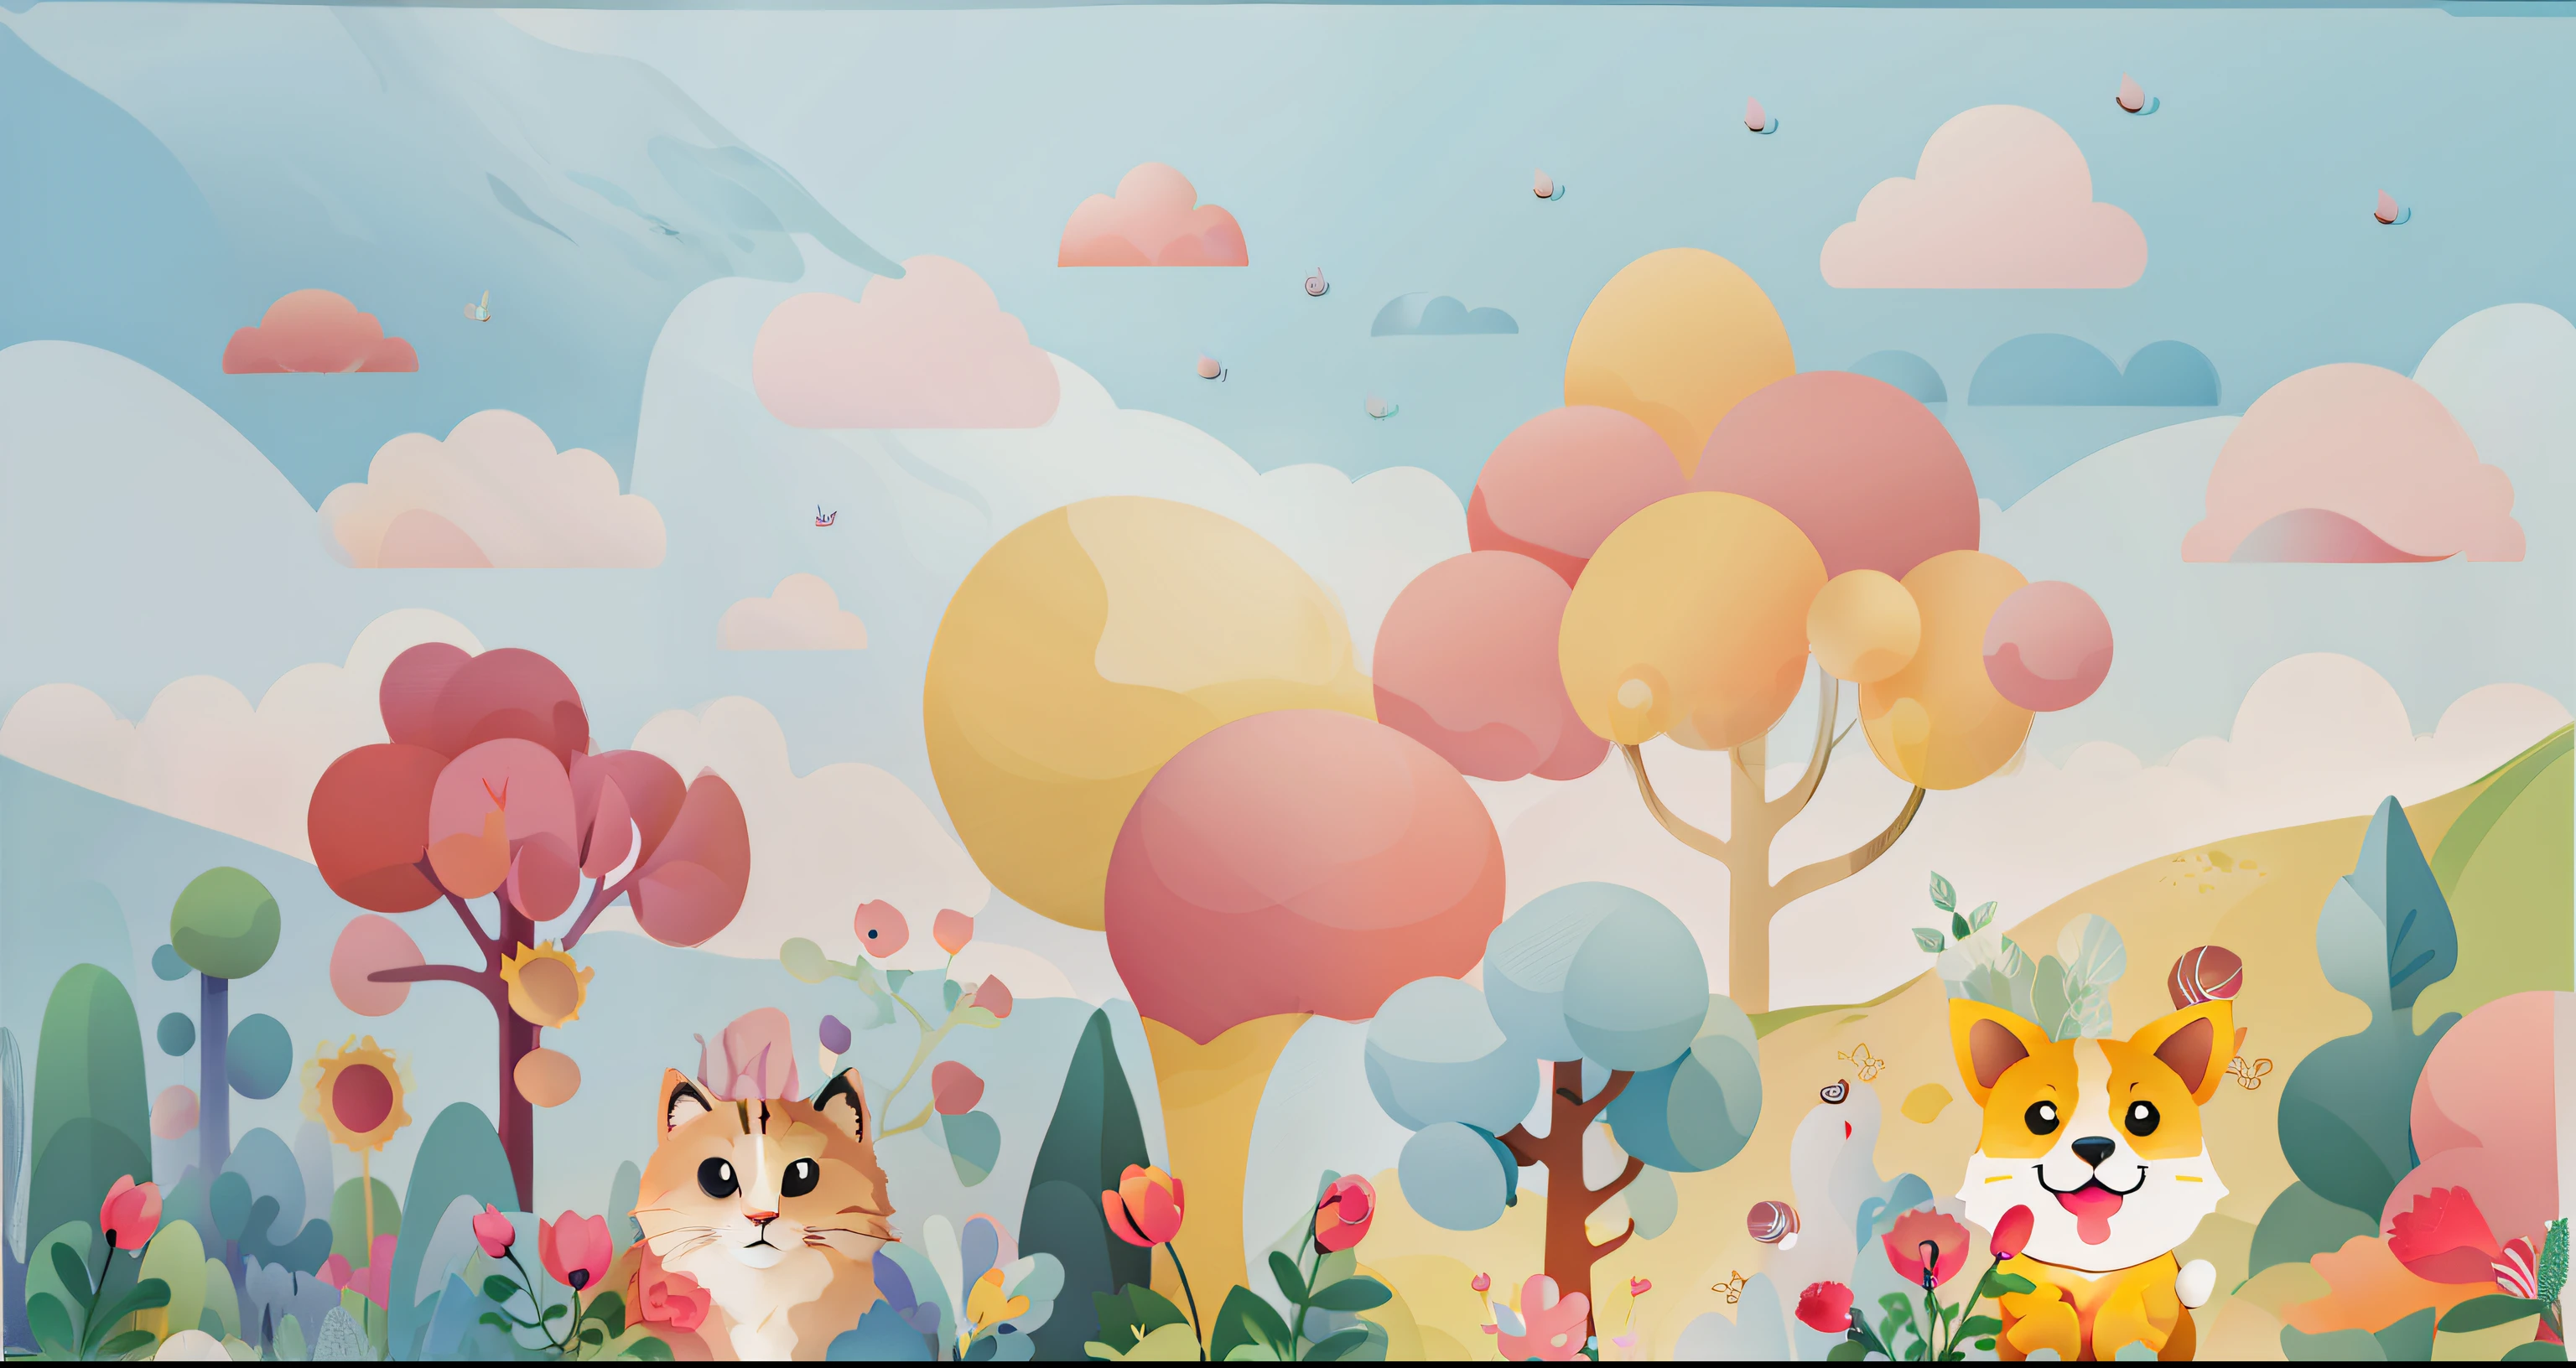 There are two cats standing on the grass, Candy Forest, soft forest background, Lovely numbers Art, Fairy tale style background, Lovely numbers, hand painted cartoon art style, whimsical forest, Magic forest background, sky forest background, 4k high definition illustration wallpaper, Highly detailed scenes, Land of Light background, Cute and detailed digital art, Lying in Baiyun Wonderland